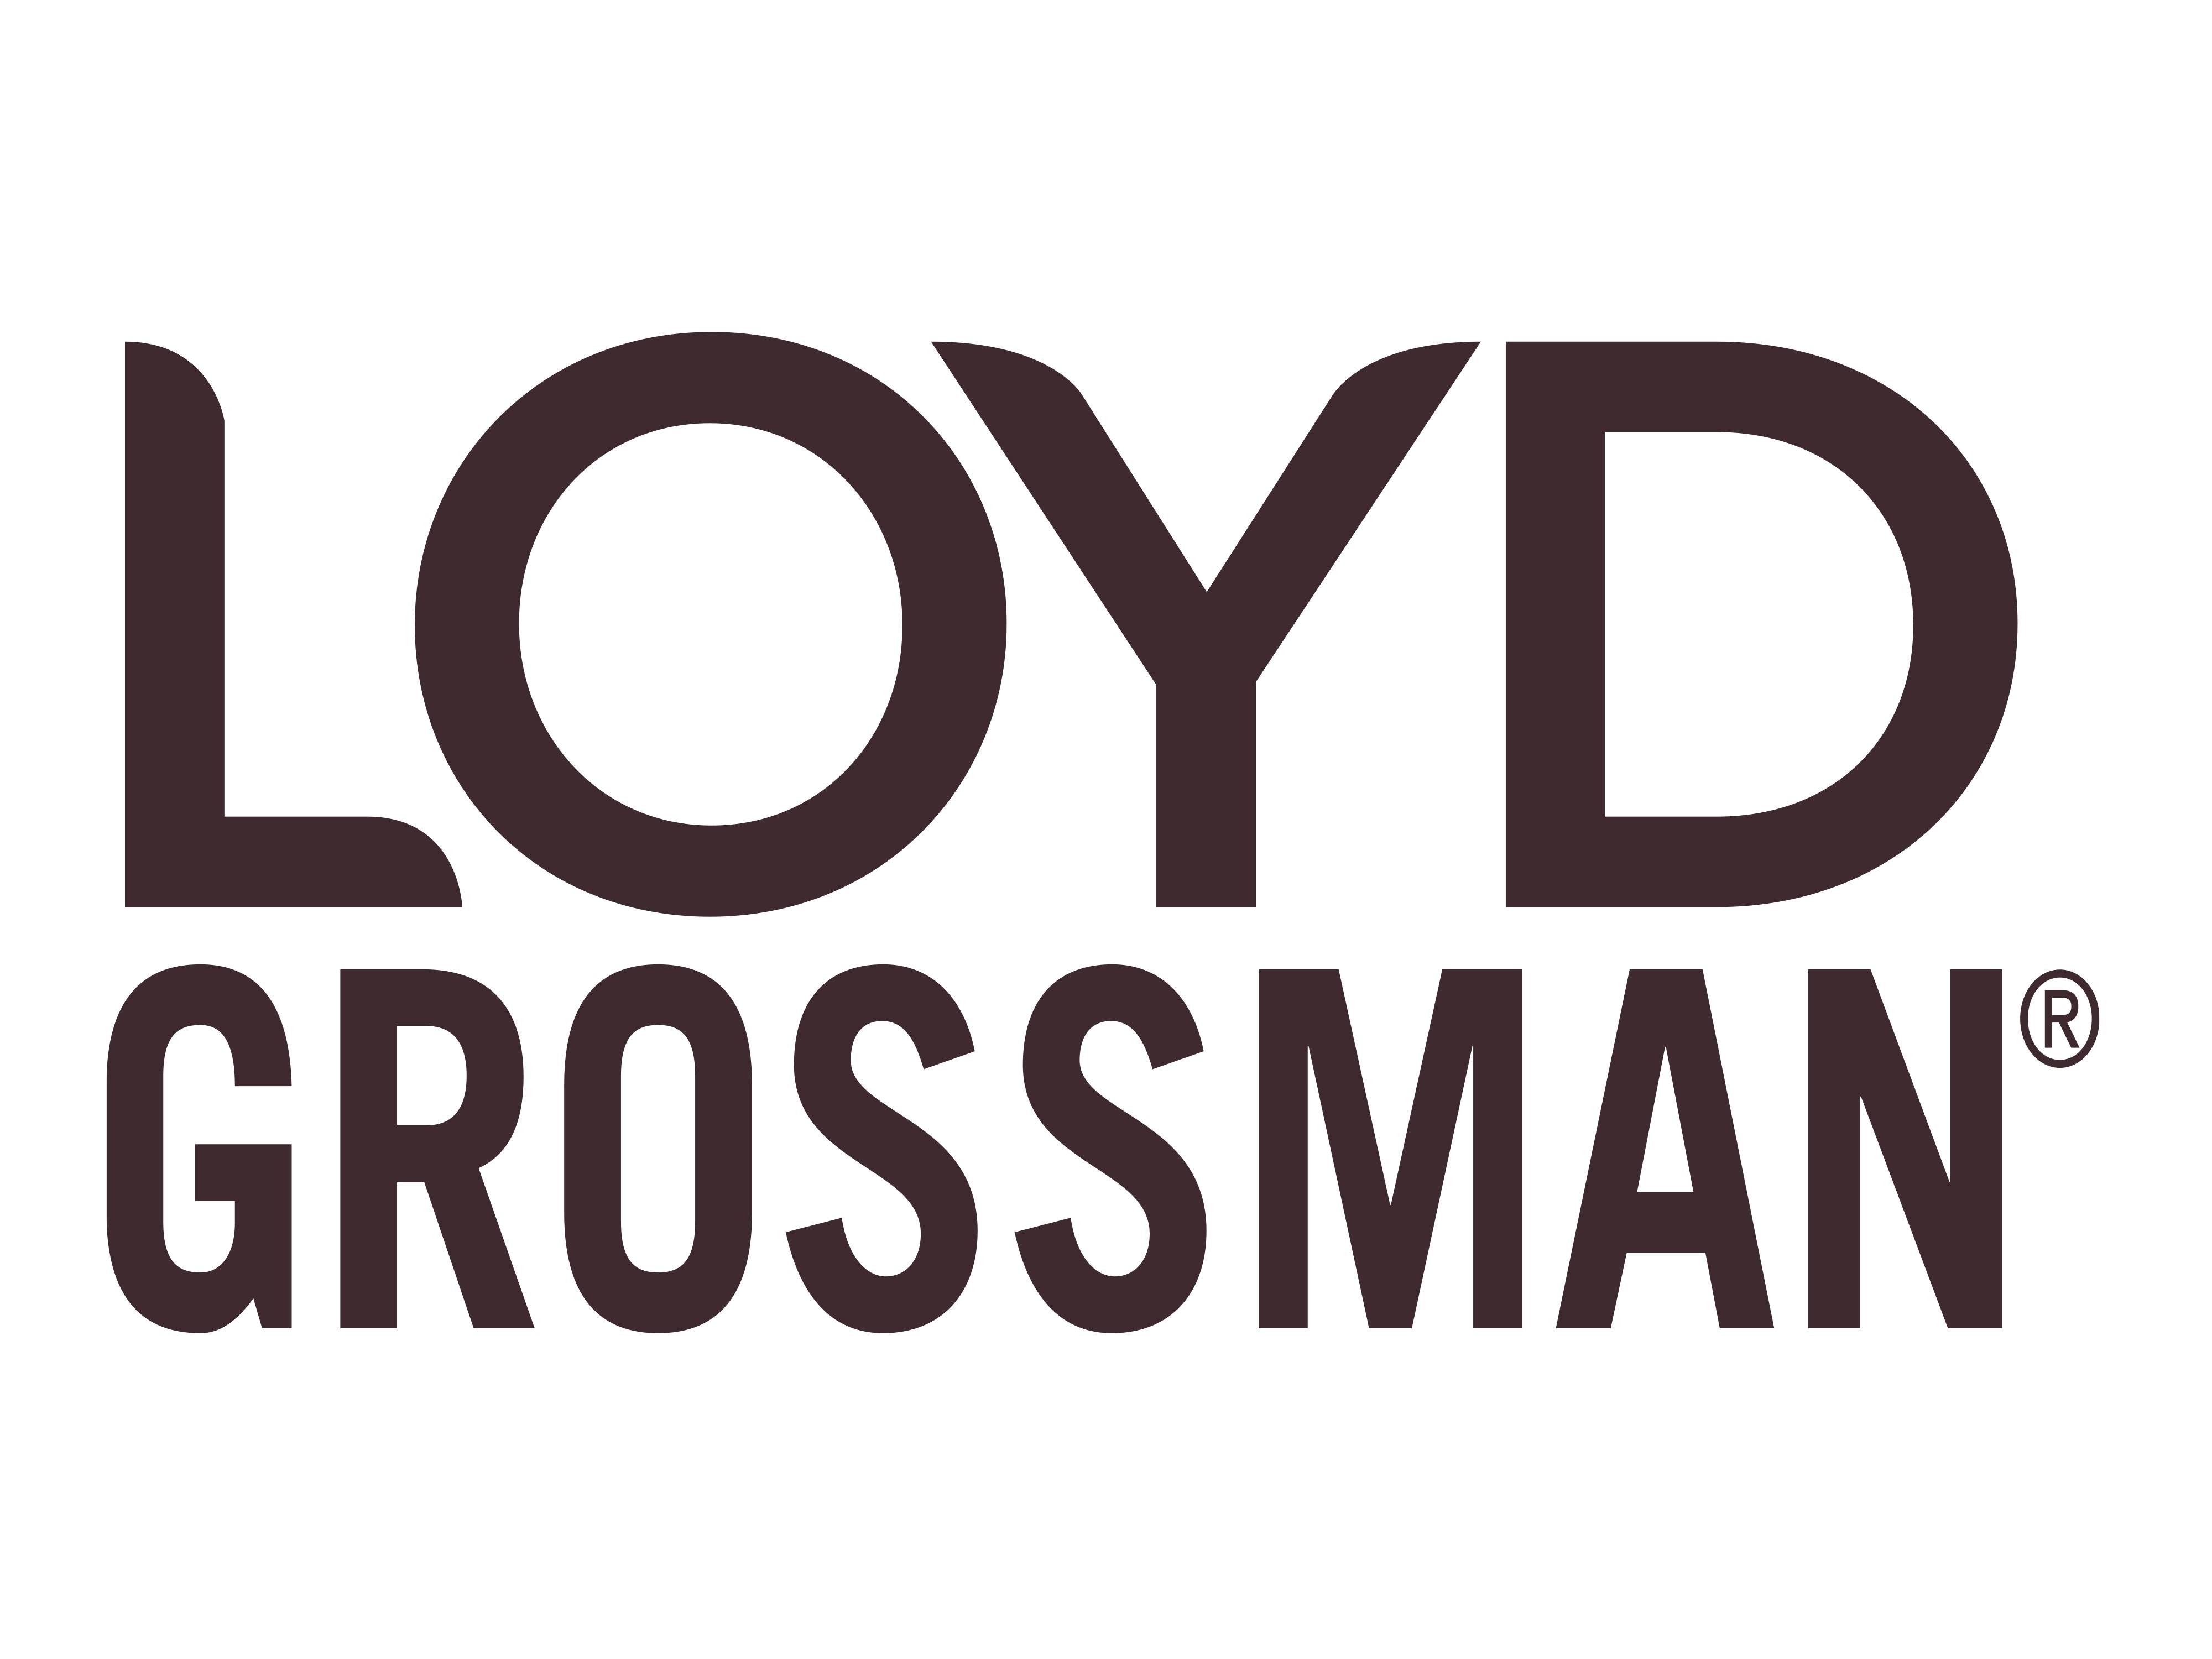 JPG: White Background
© 2019, Loyd Grossman.
All Rights Reserved. Used under licence.